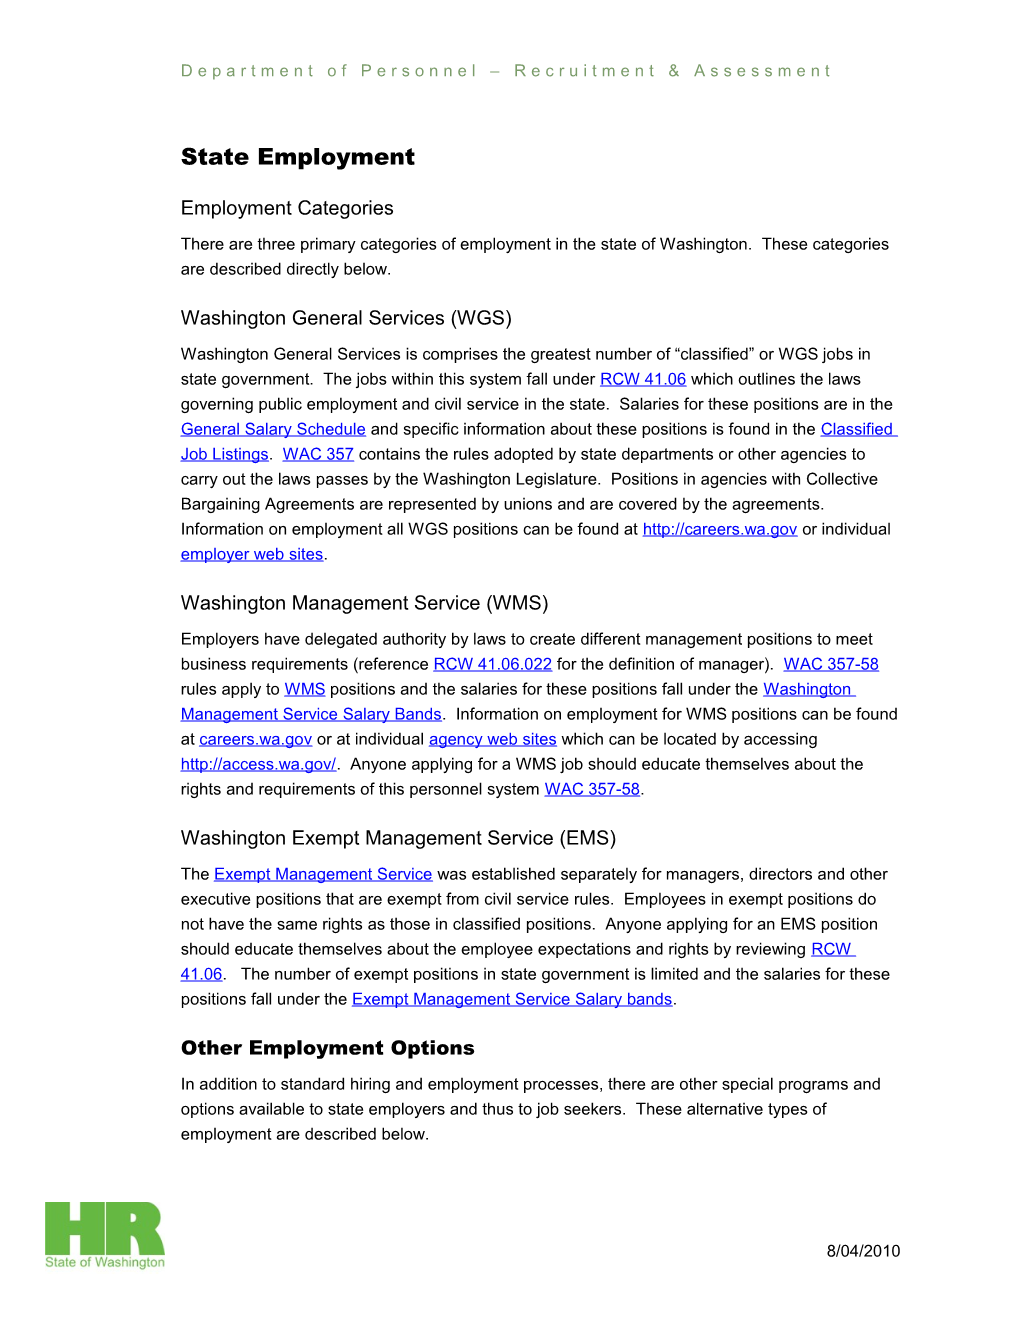 State Employment Categories and Options